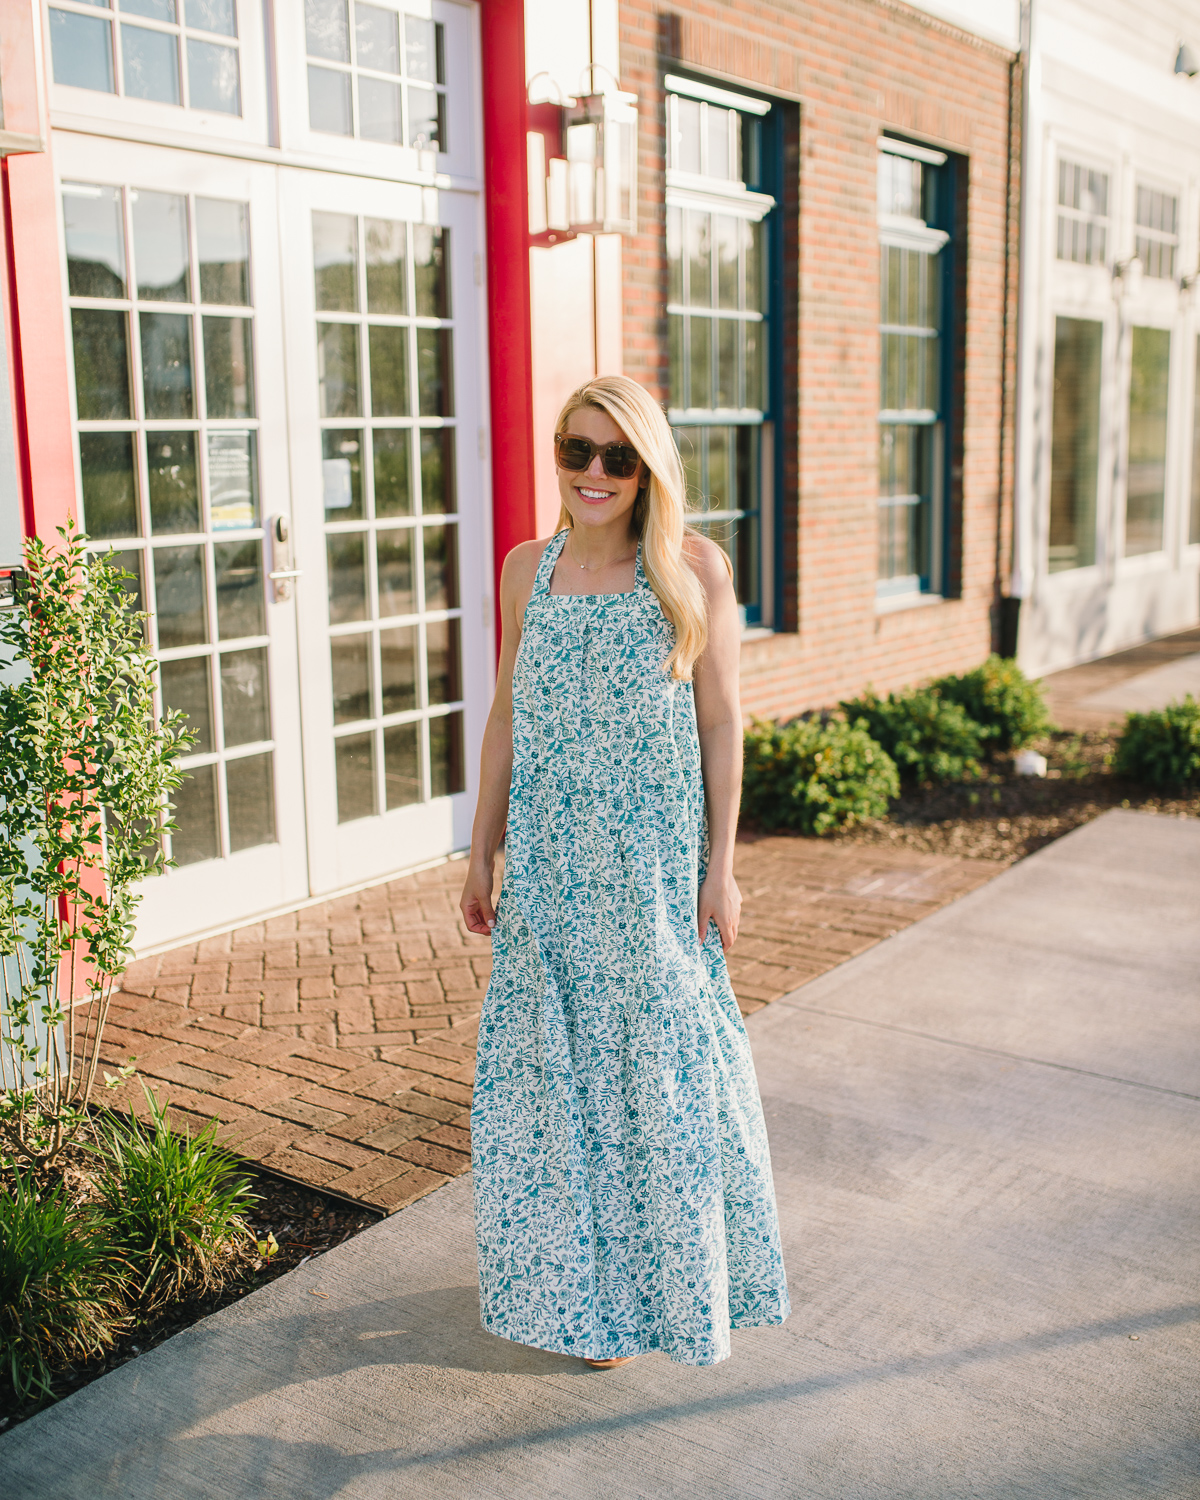 Summer Wind: Blue and White Maxi Dress